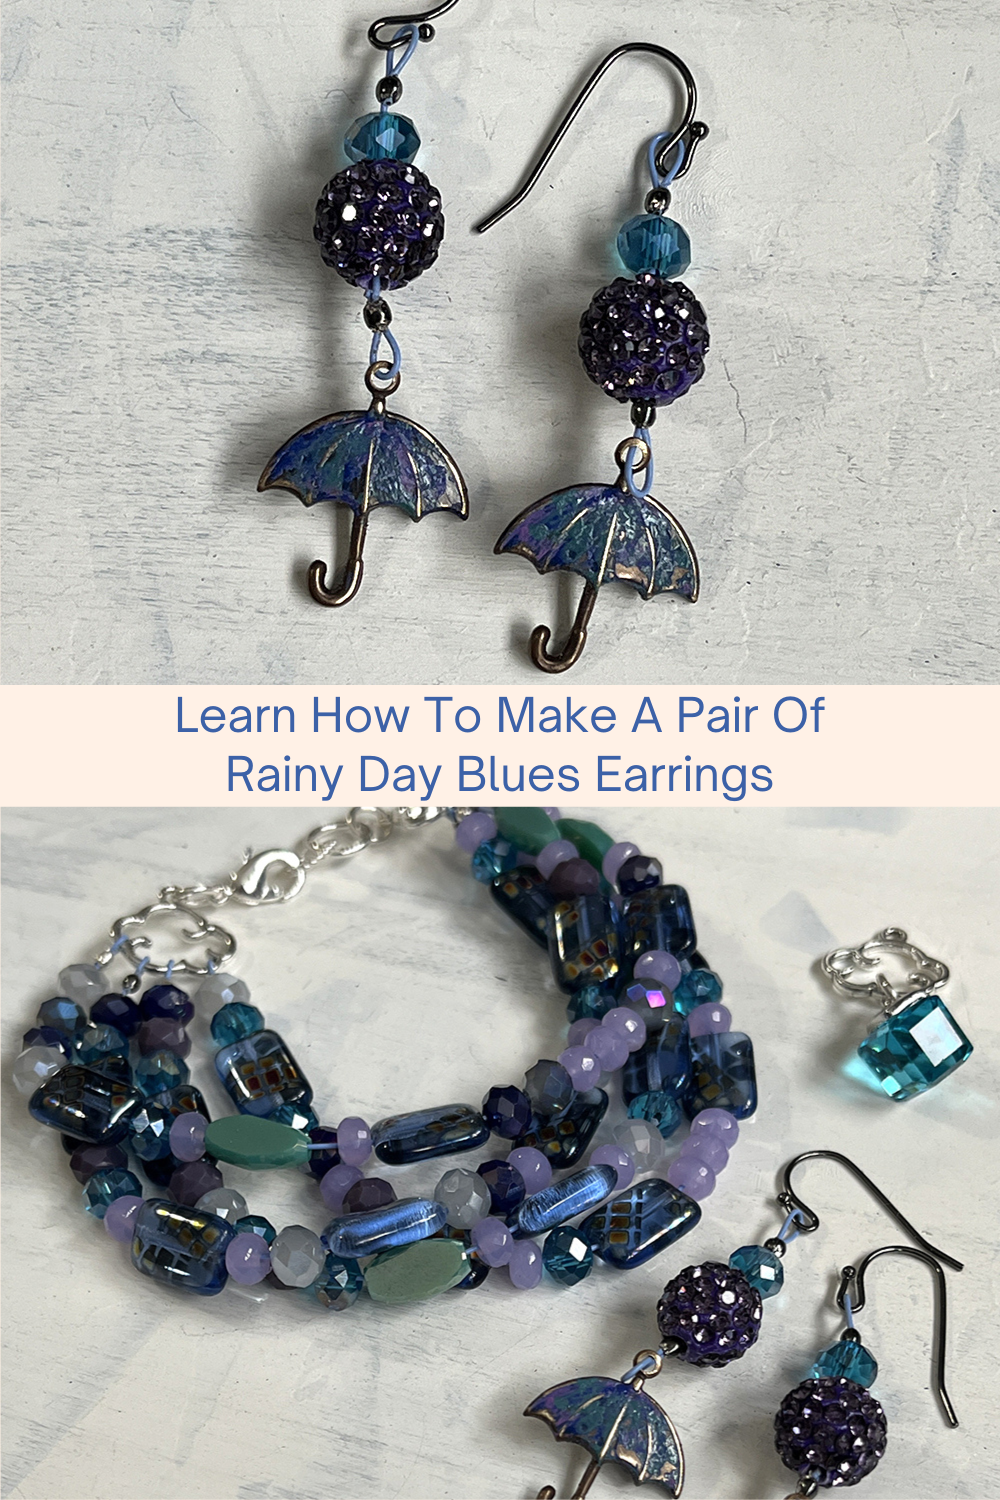 Learn How To Make A Pair Of Rainy Day Blues Earrings Collage